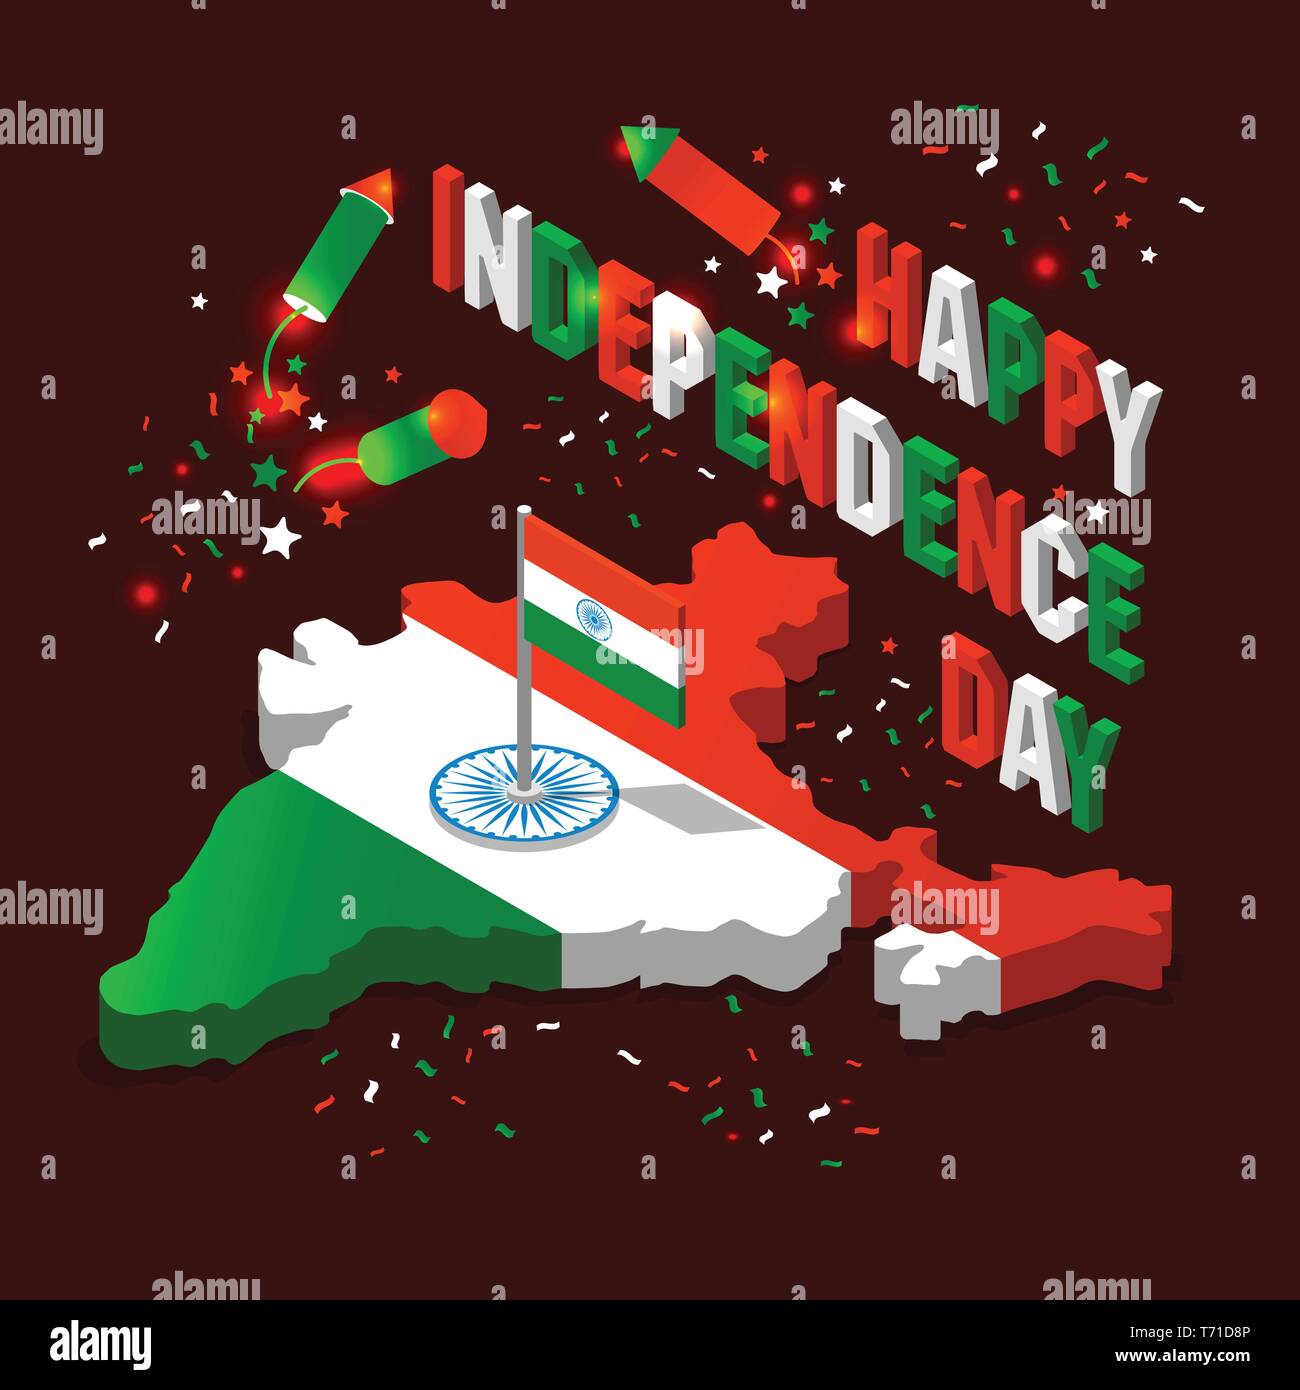 India map in national flag tricolors Abstract background for India Independence Day. Stock Vector